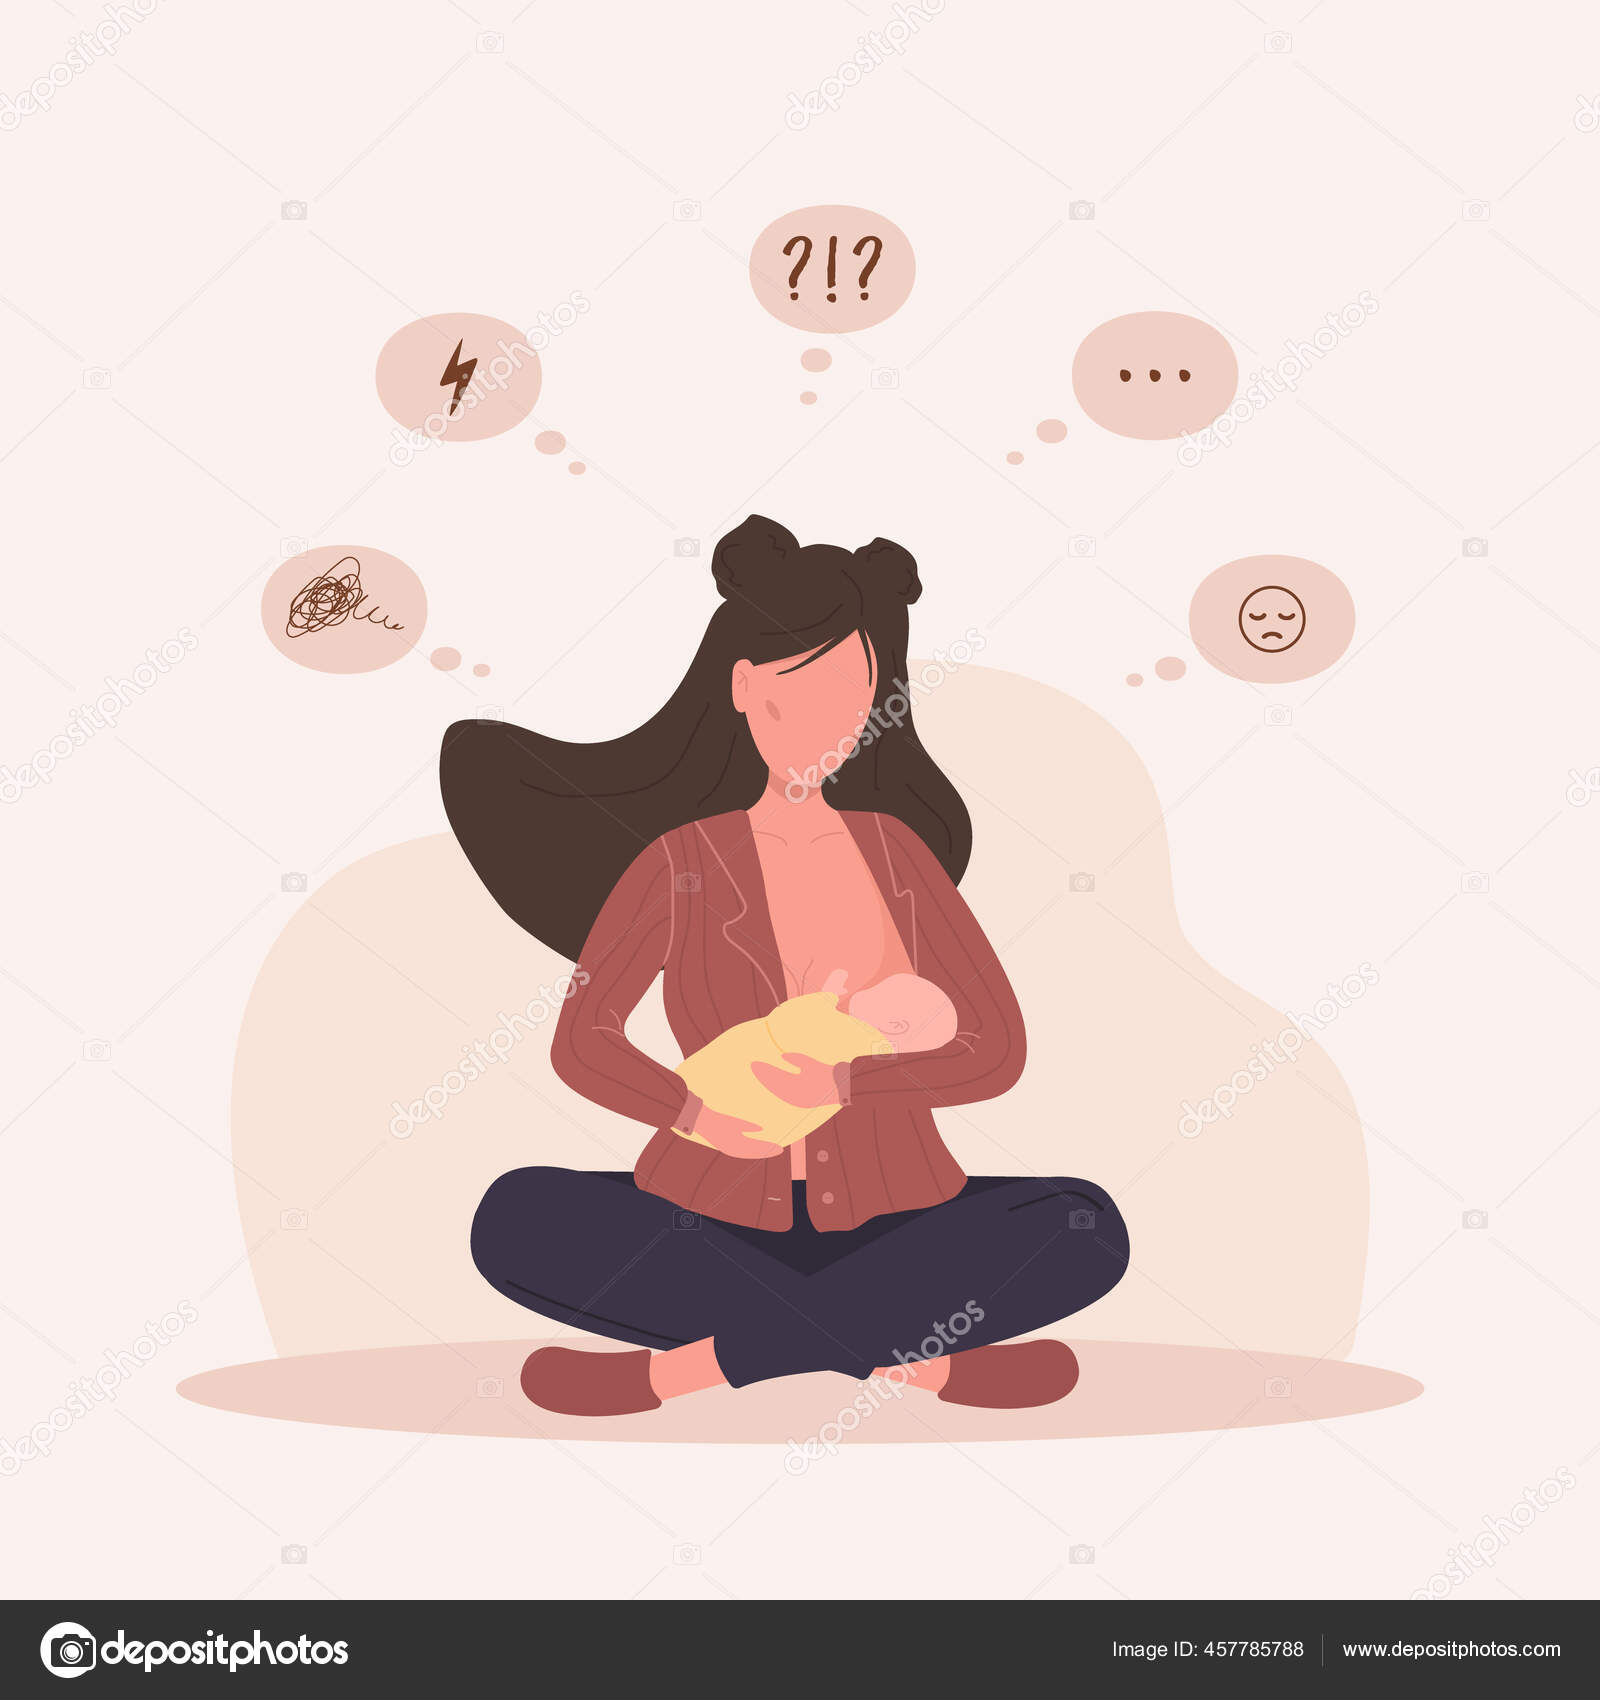 Breastfeeding problems and questions. Postpartum depression. Woman ...